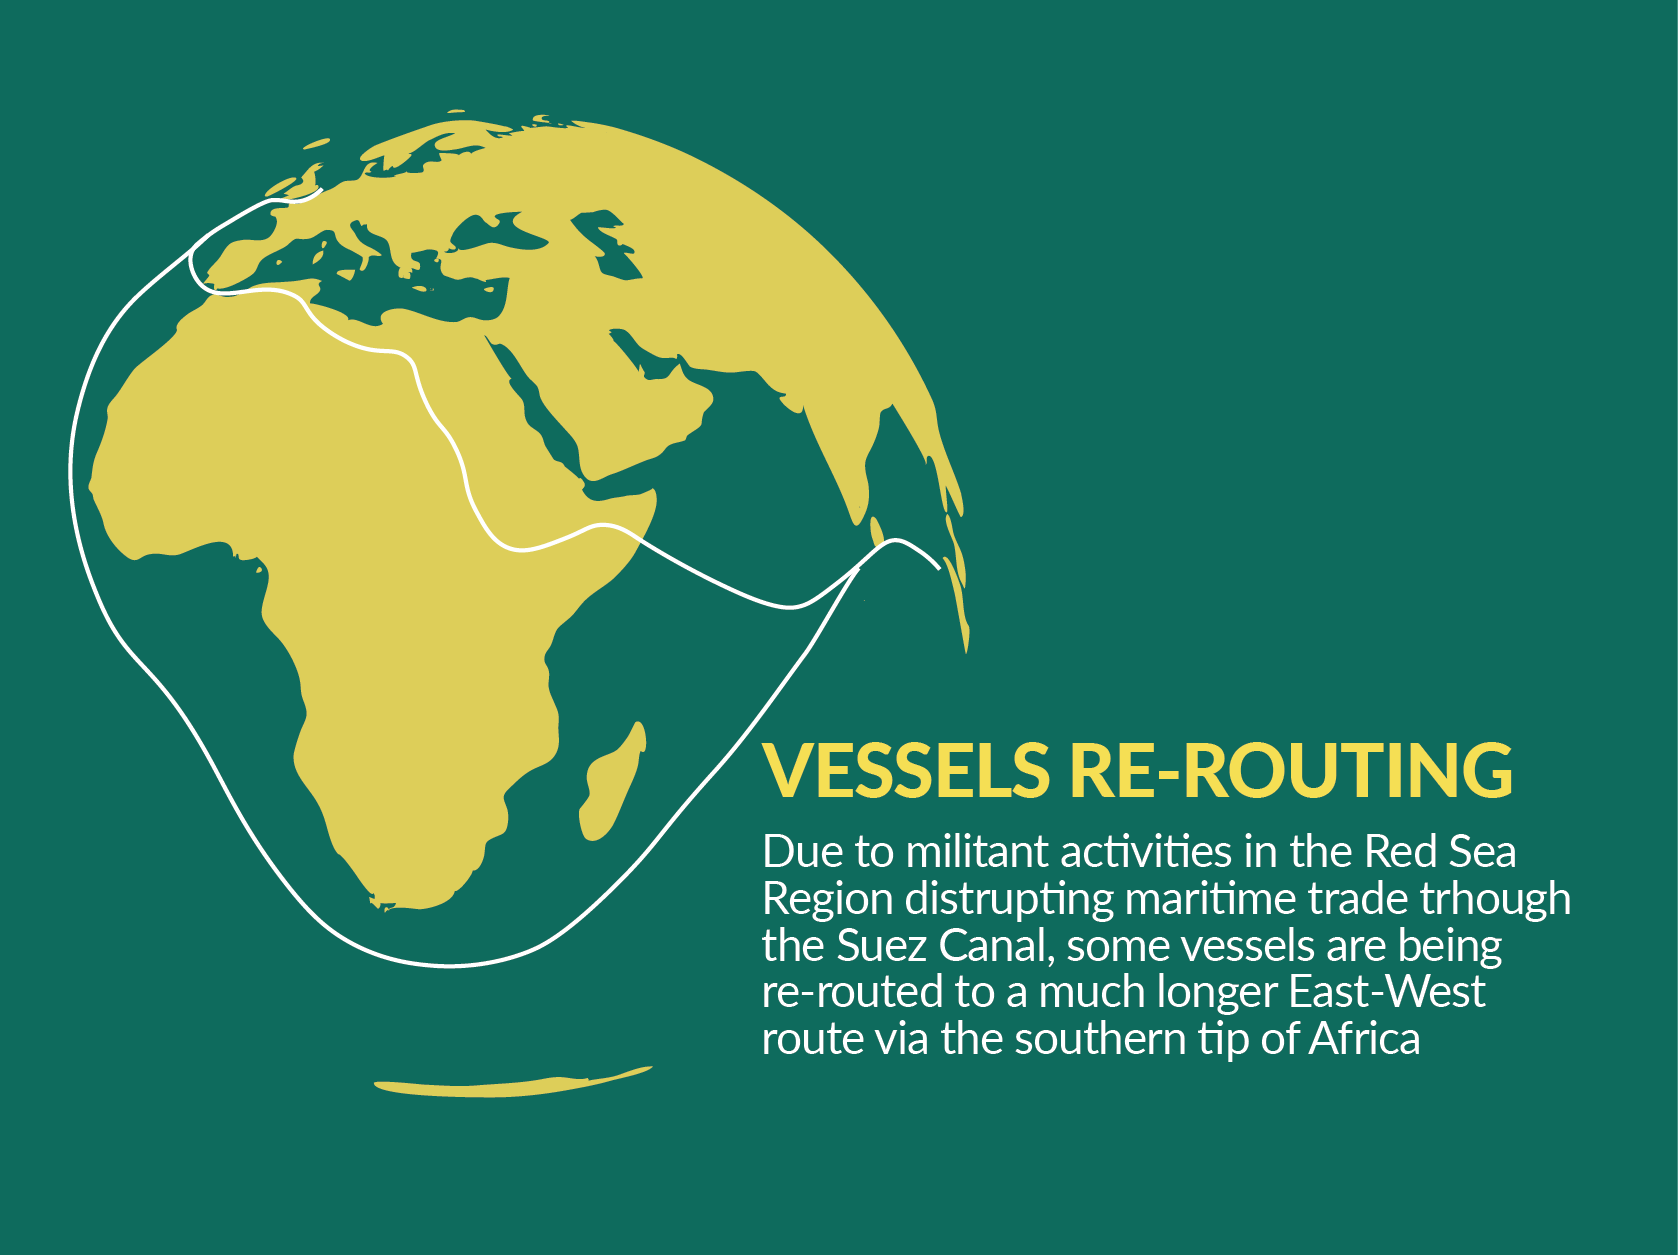 Challenges Affecting Shipping Trade Routes in the Red Sea Region